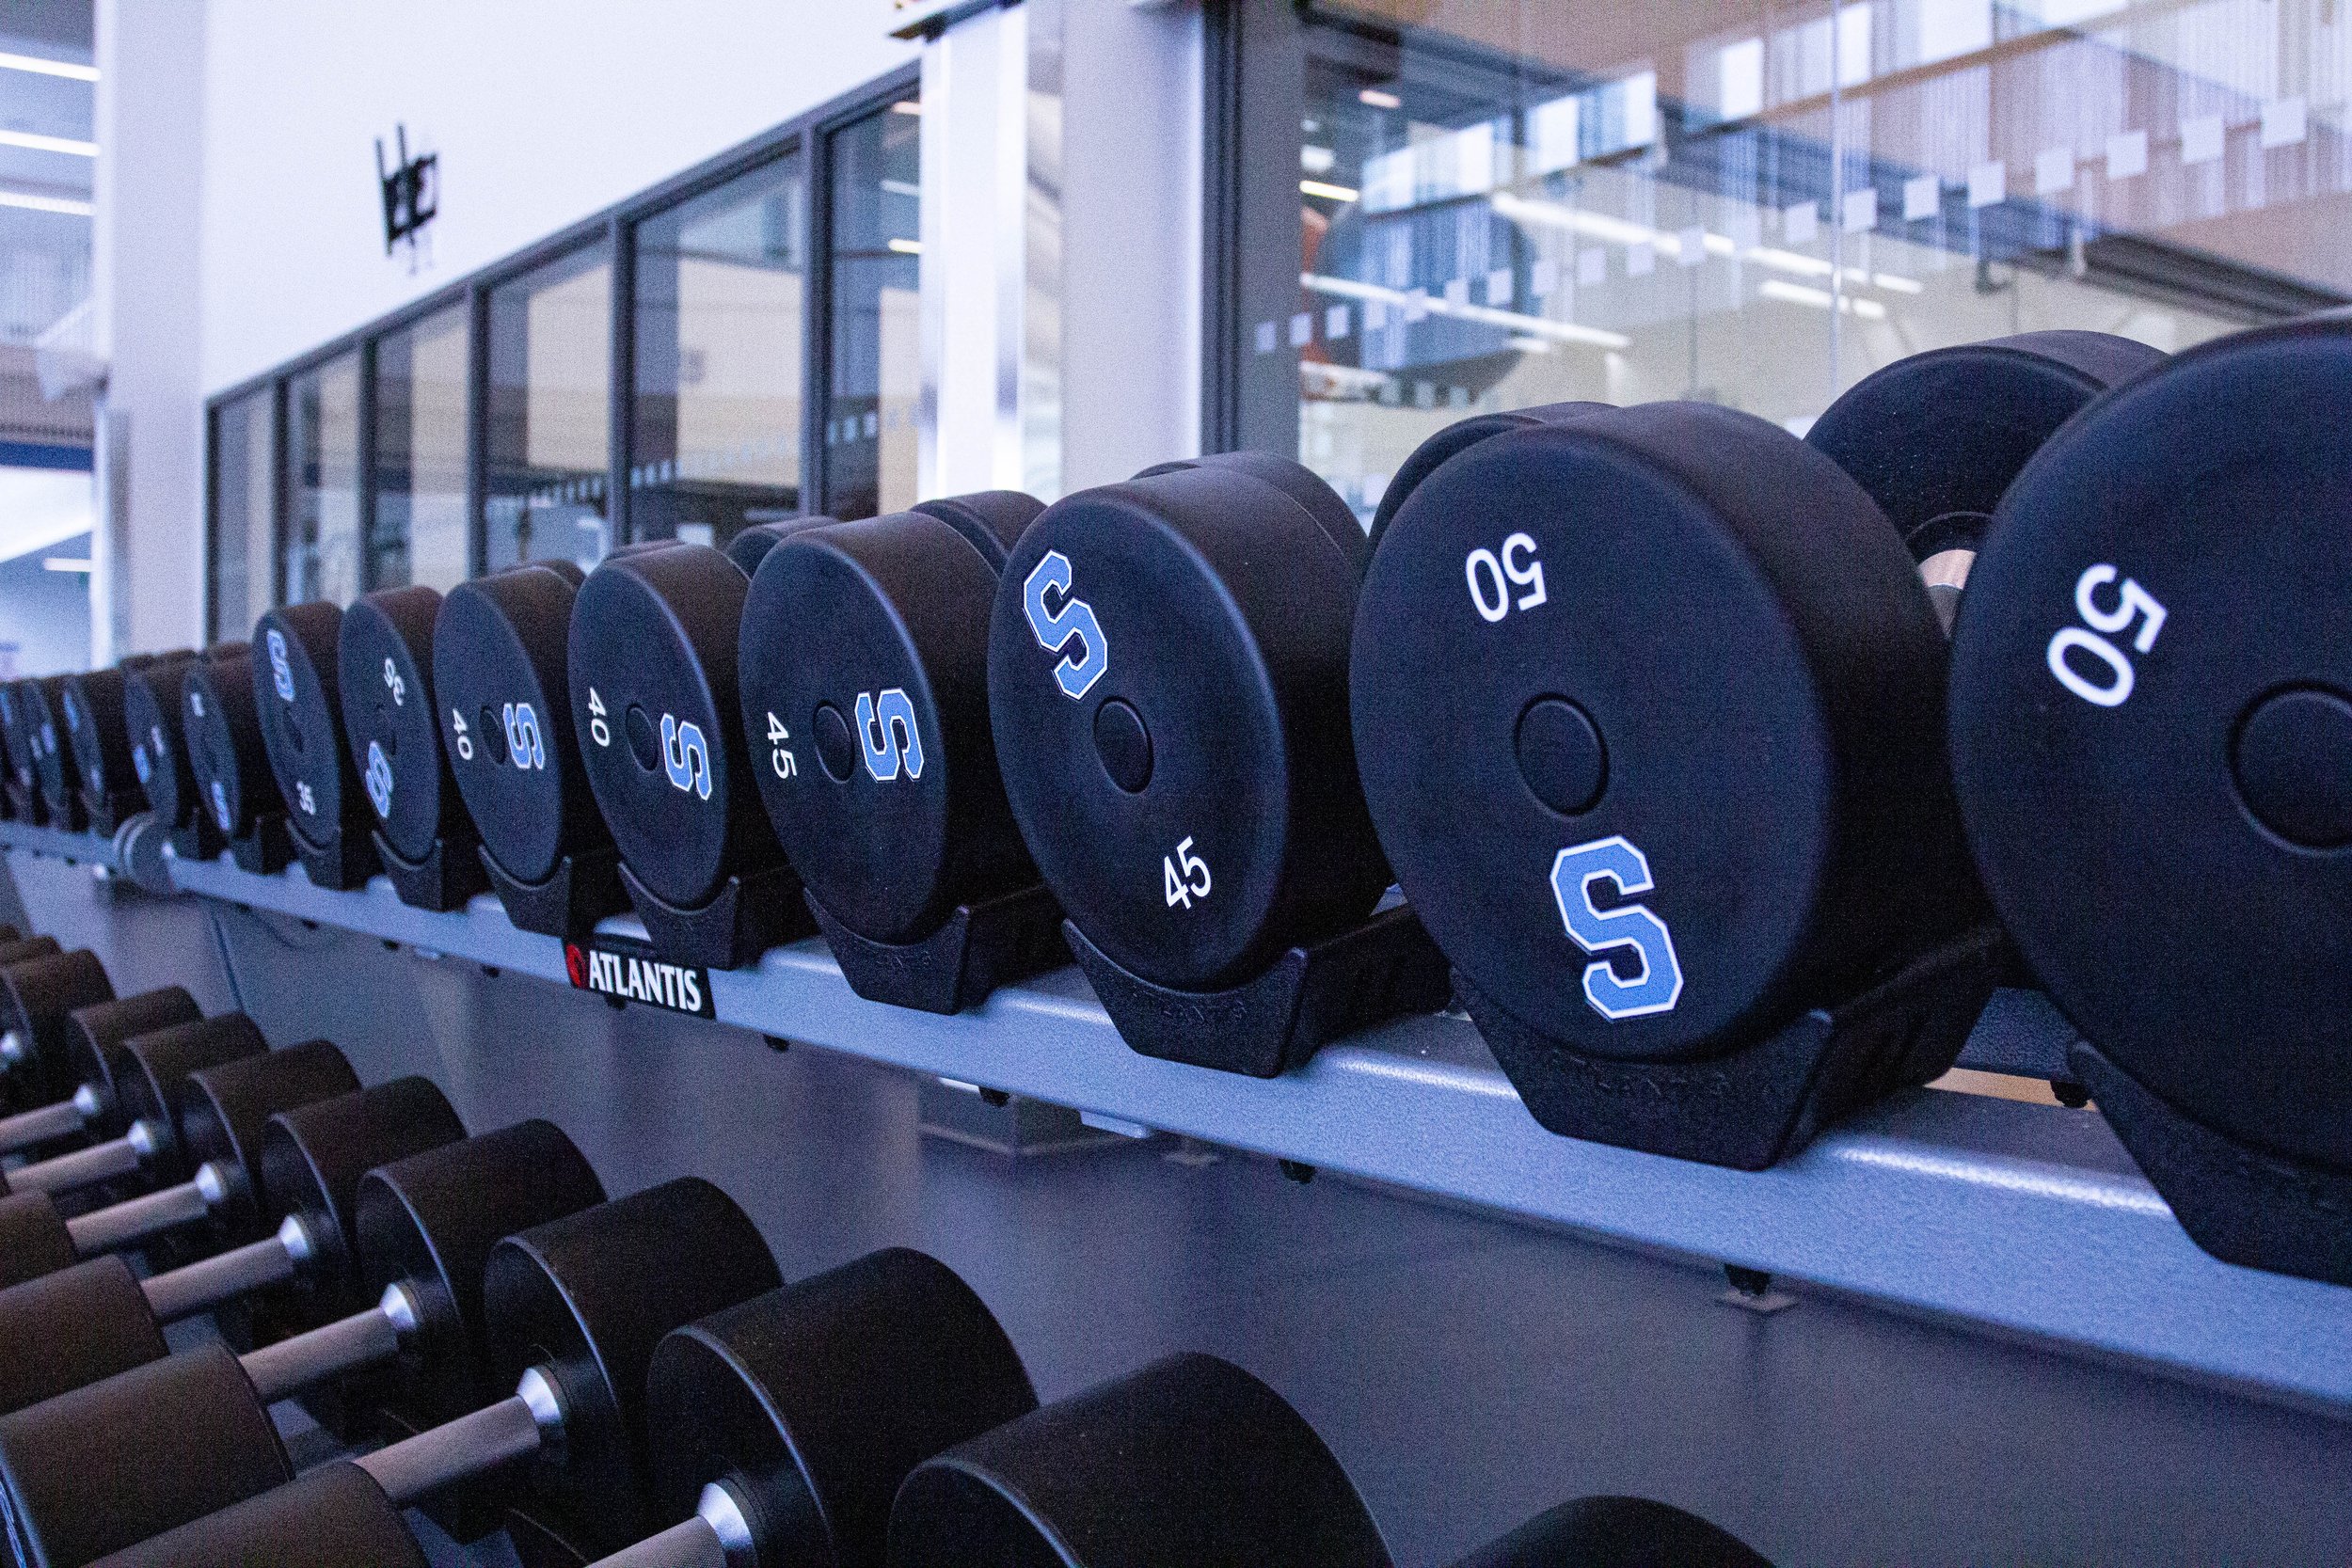  A row of navy dumbbells with the Sheridan Bruins logo (light blue S) on the shelf. Each dumbbell weighs 50 pounds, and decreases in weight as the row is further away.  